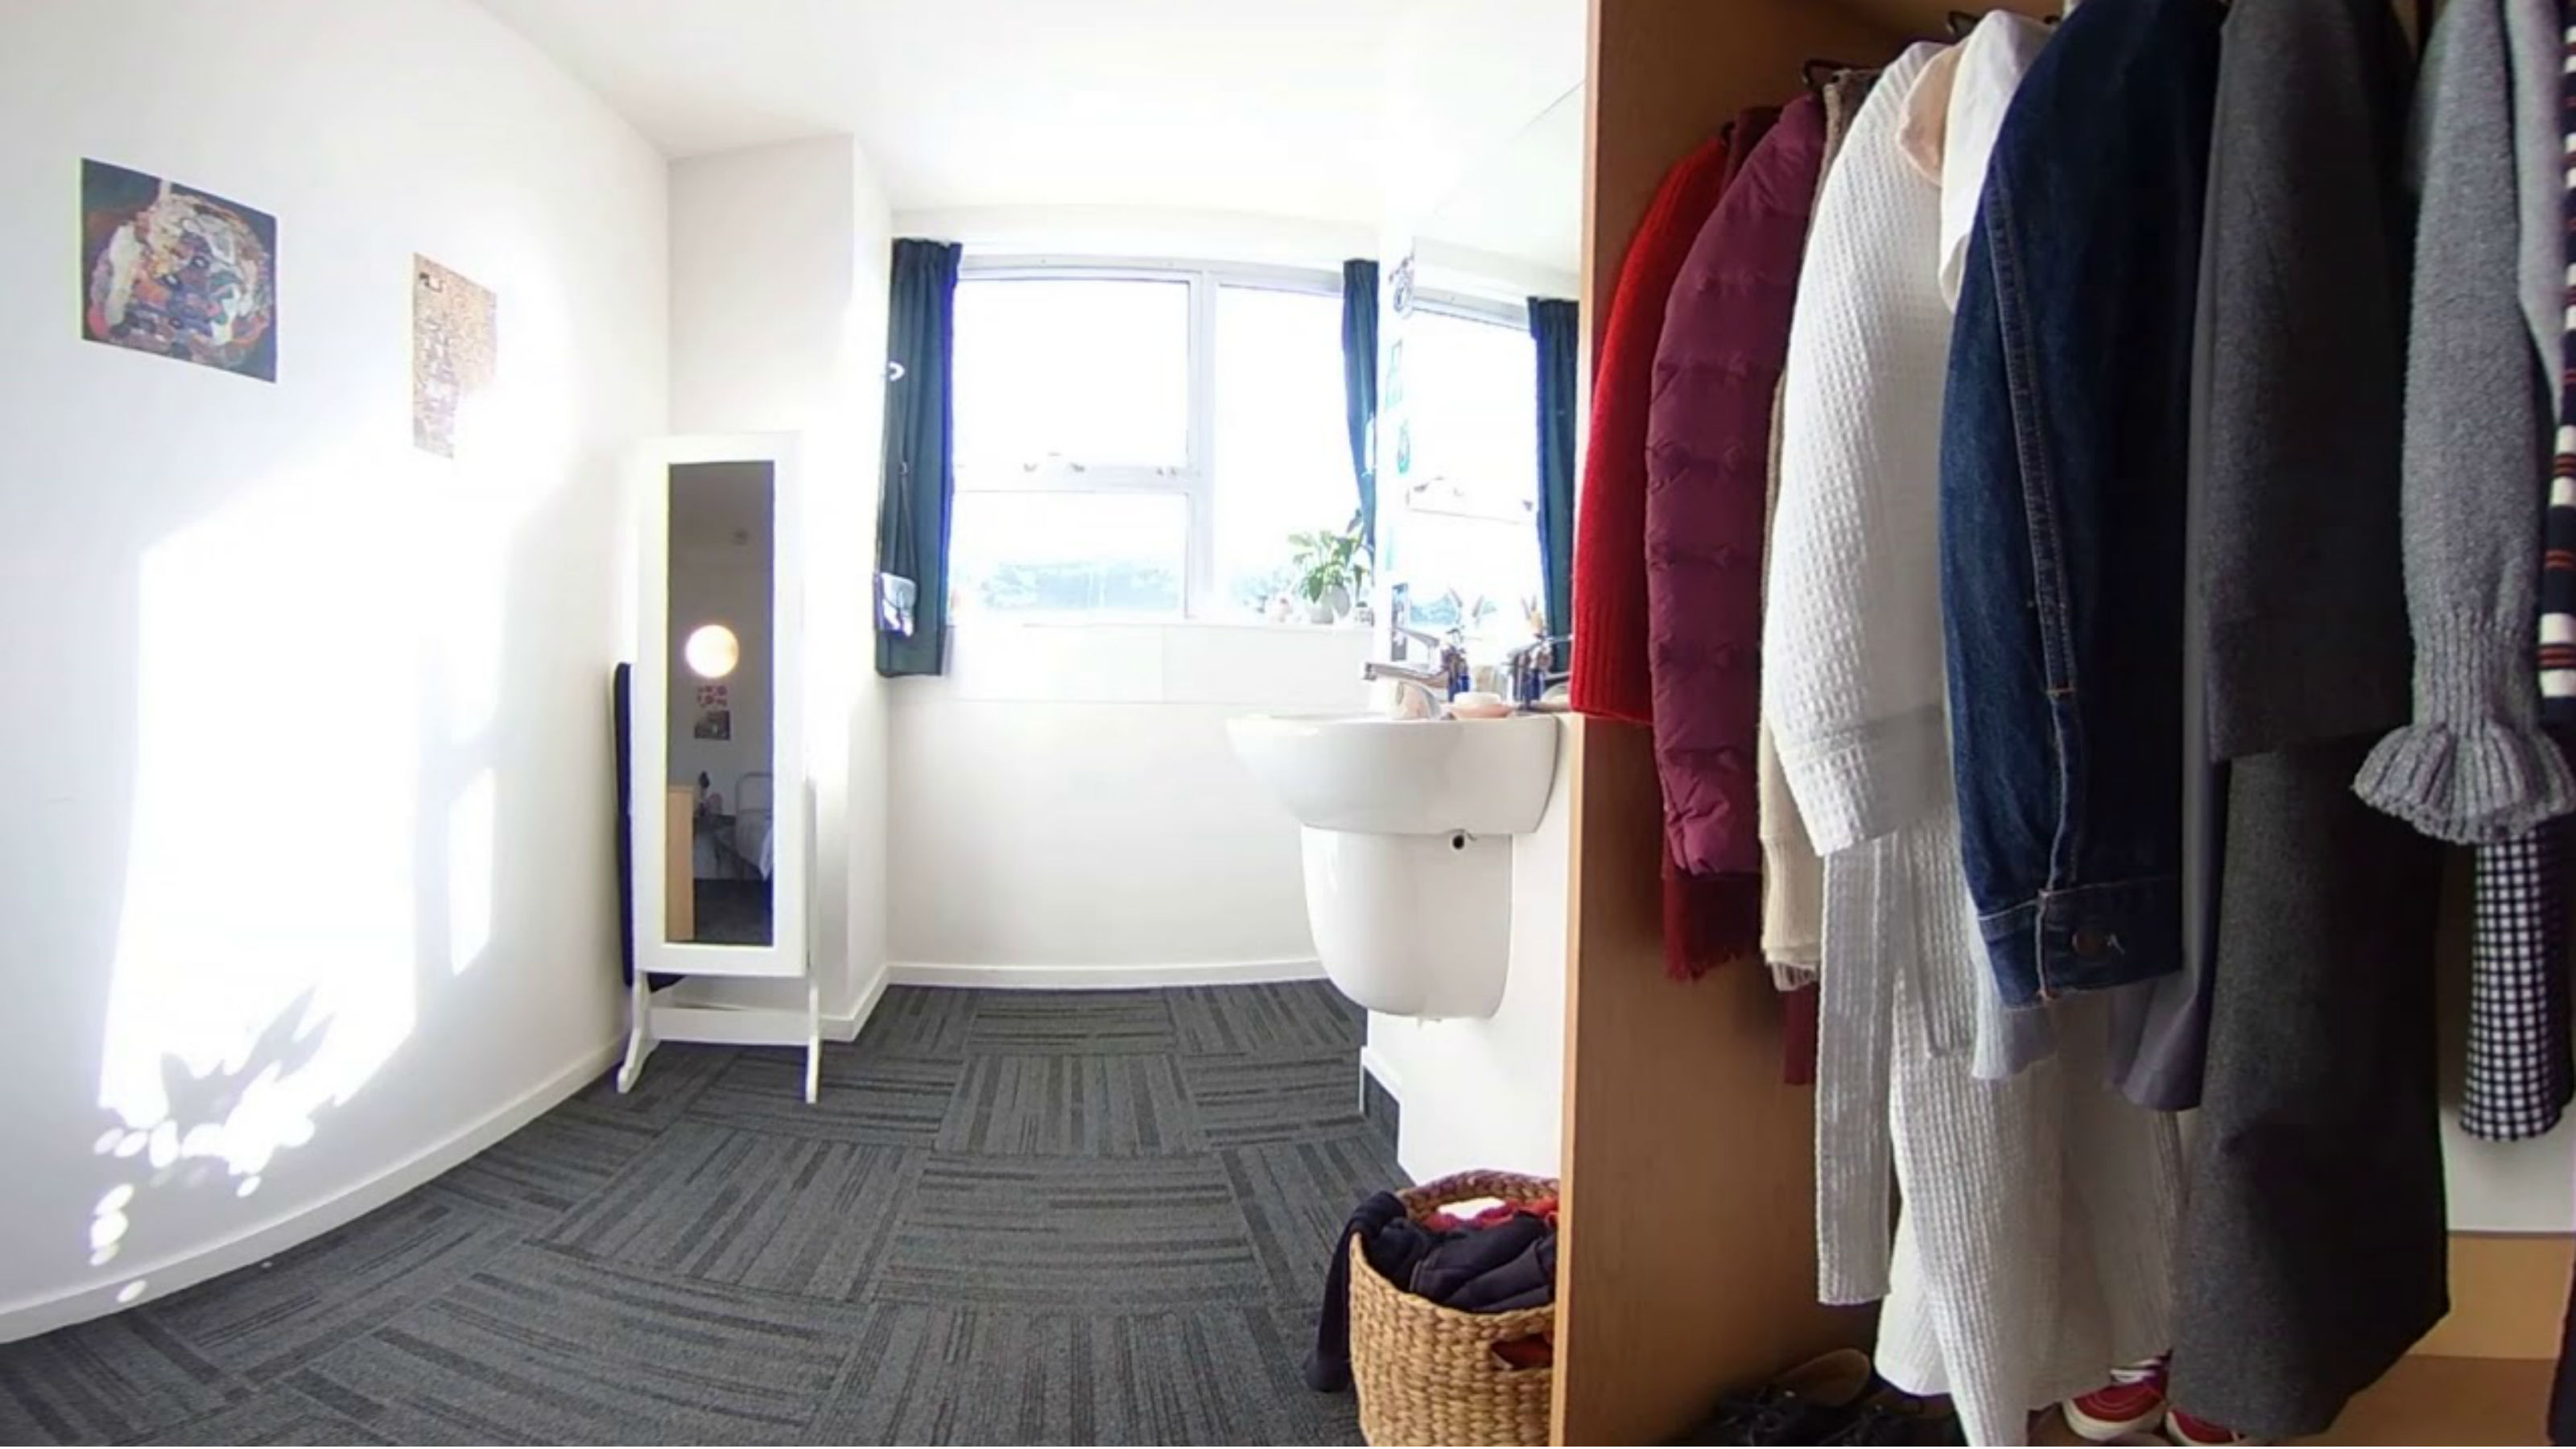 An image of a full wardrobe, a sink, and bright window.